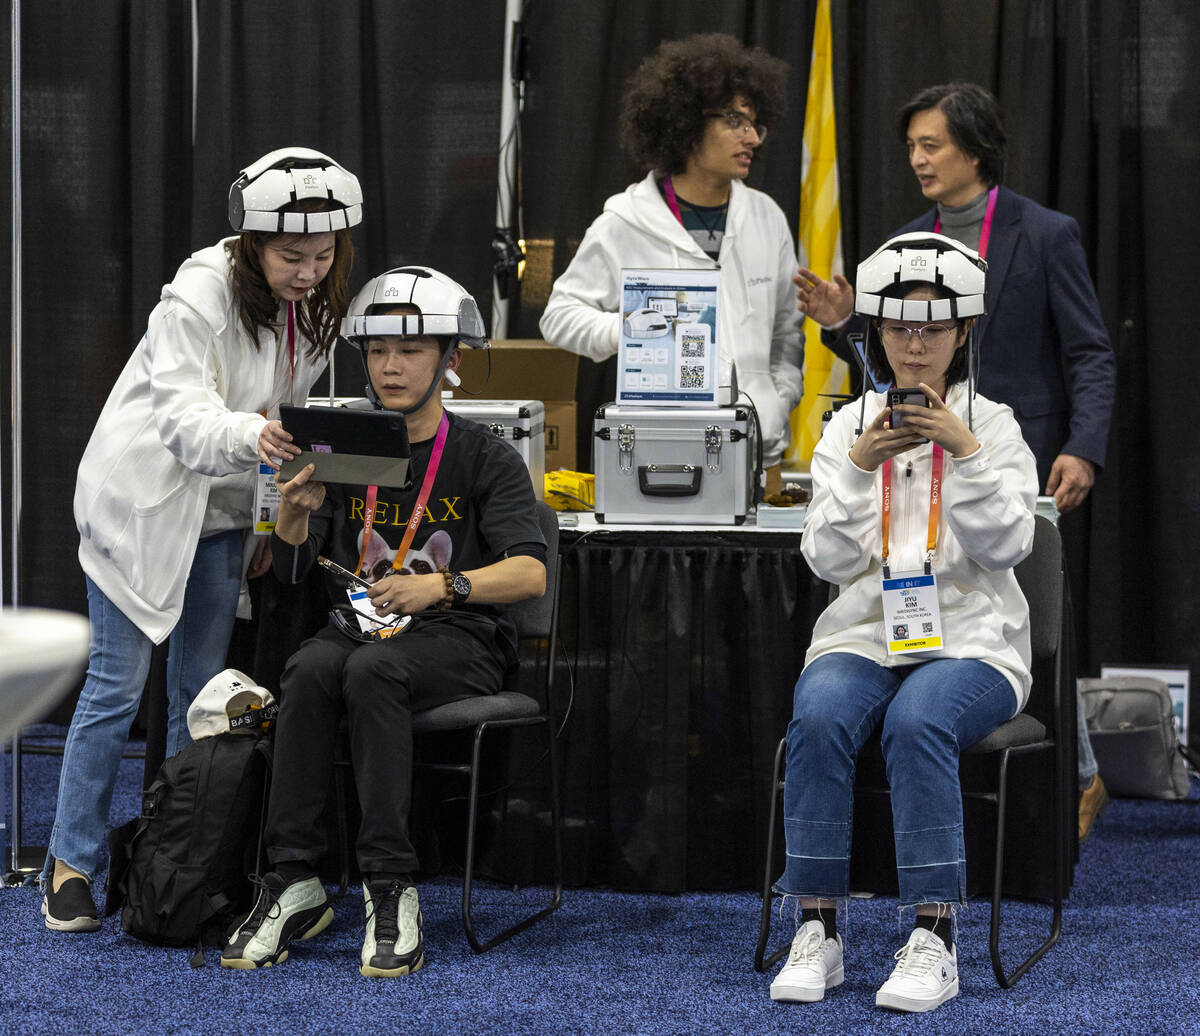 iSyncWave EEG Brain Scanners are demonstrated during the CES Unveiled media days event at the M ...